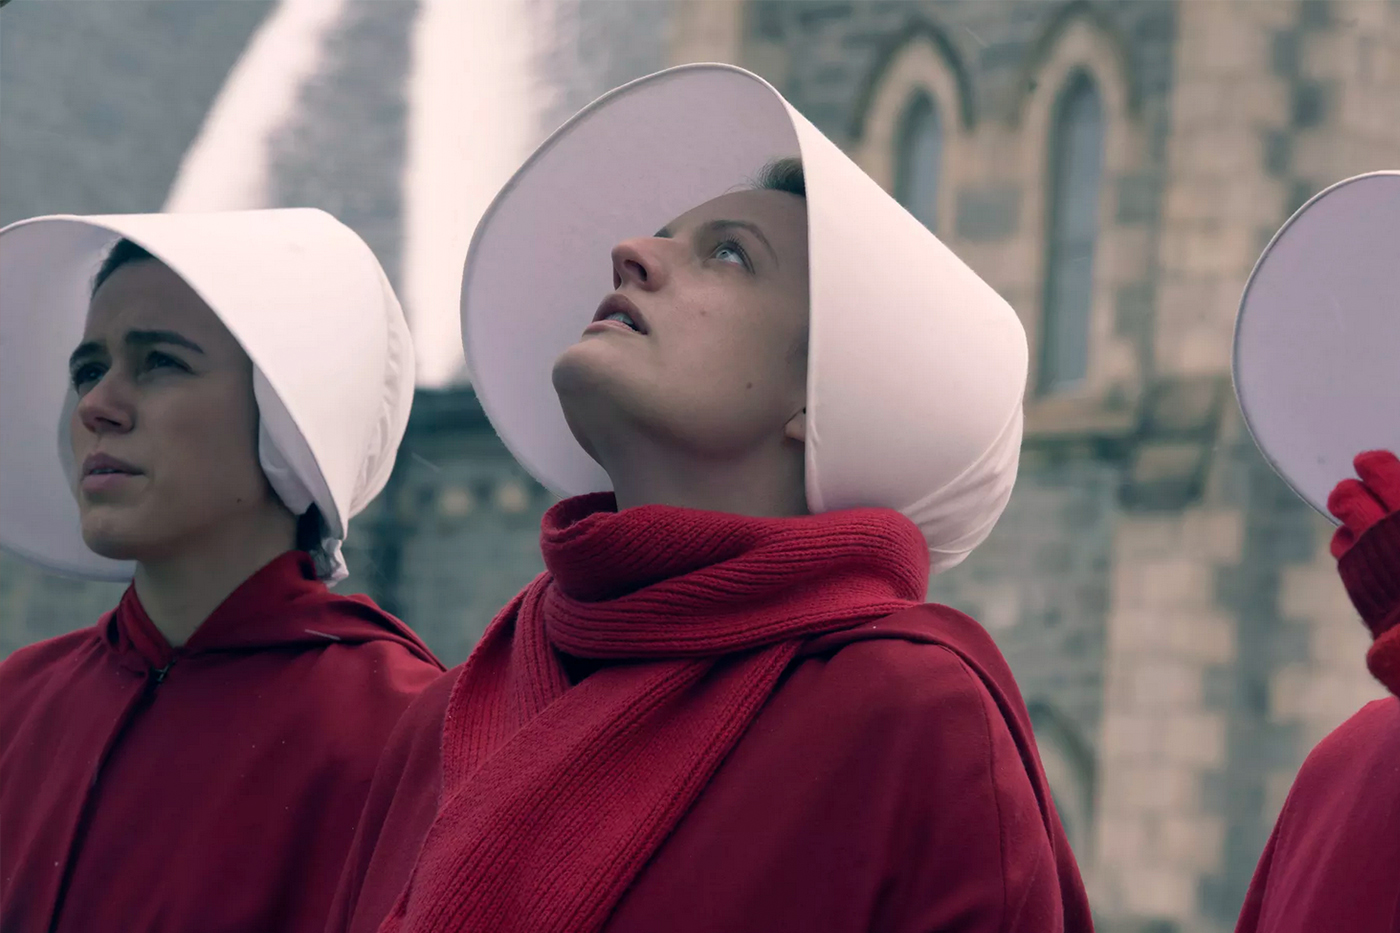 What The Handmaid’s Tale, Hulu’s dystopian drama, can teach us about